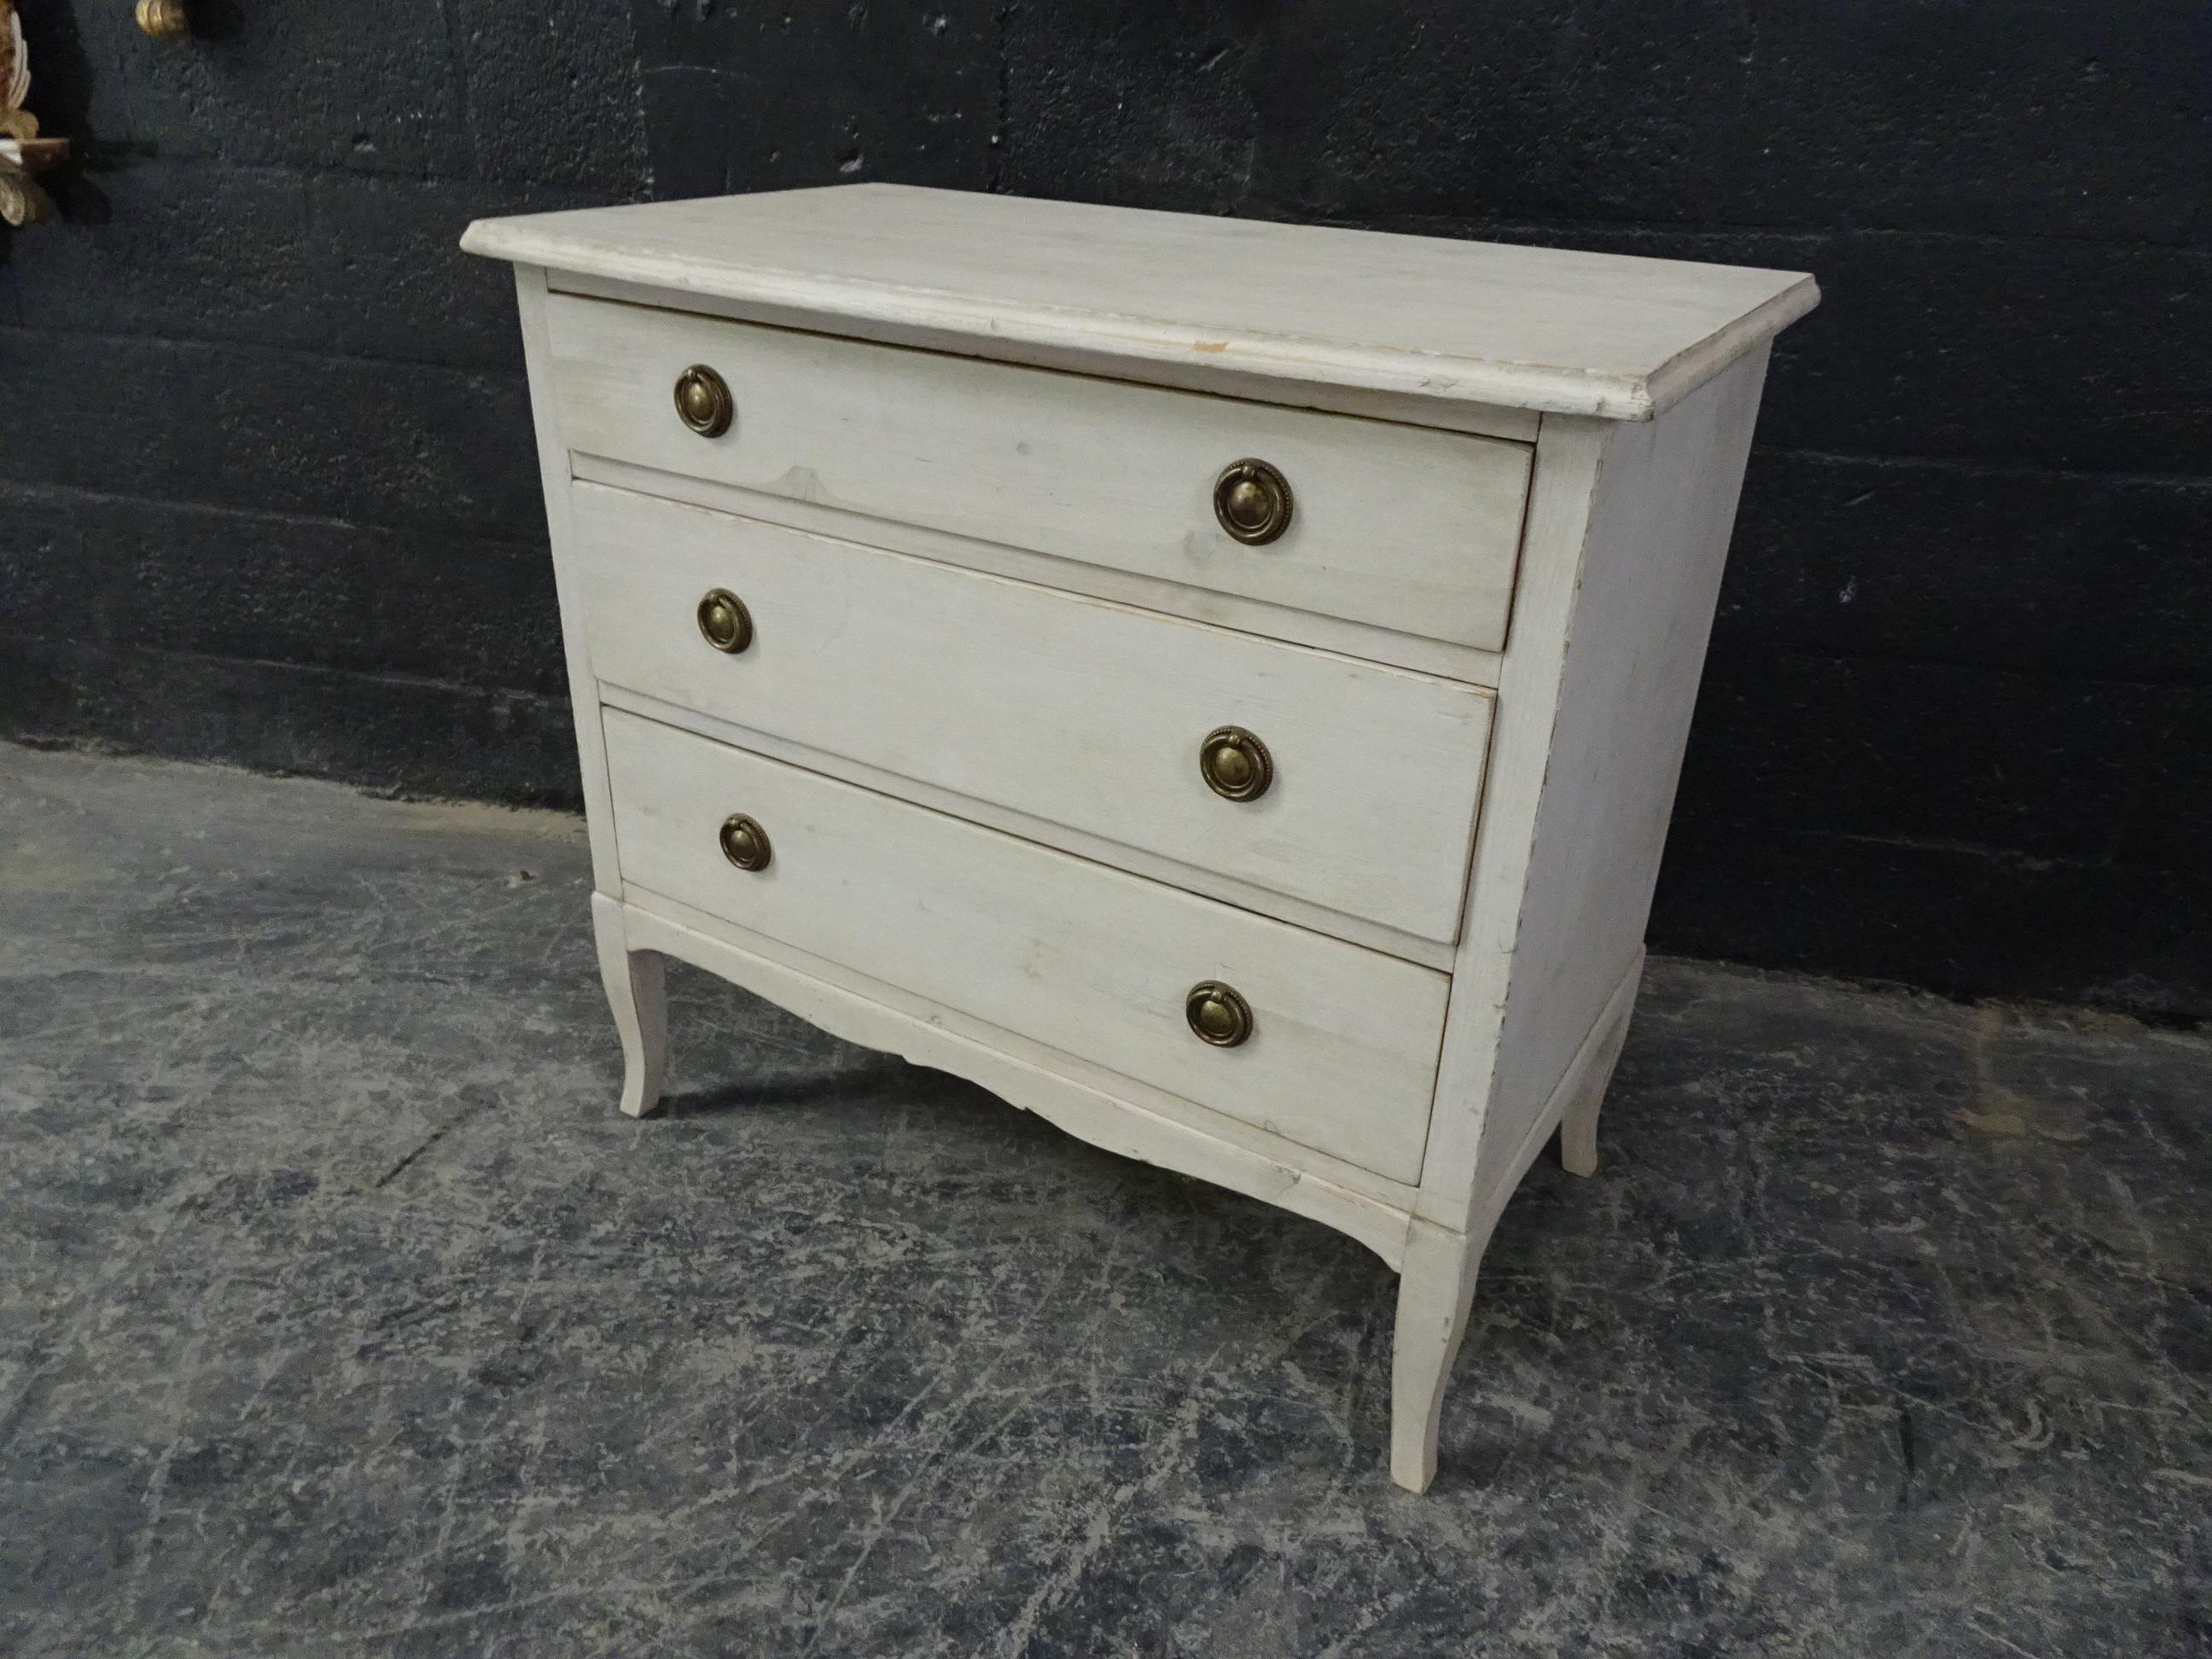 This is a Swedish Gustavian chest of drawers, its been restored and repainted with milk paints 